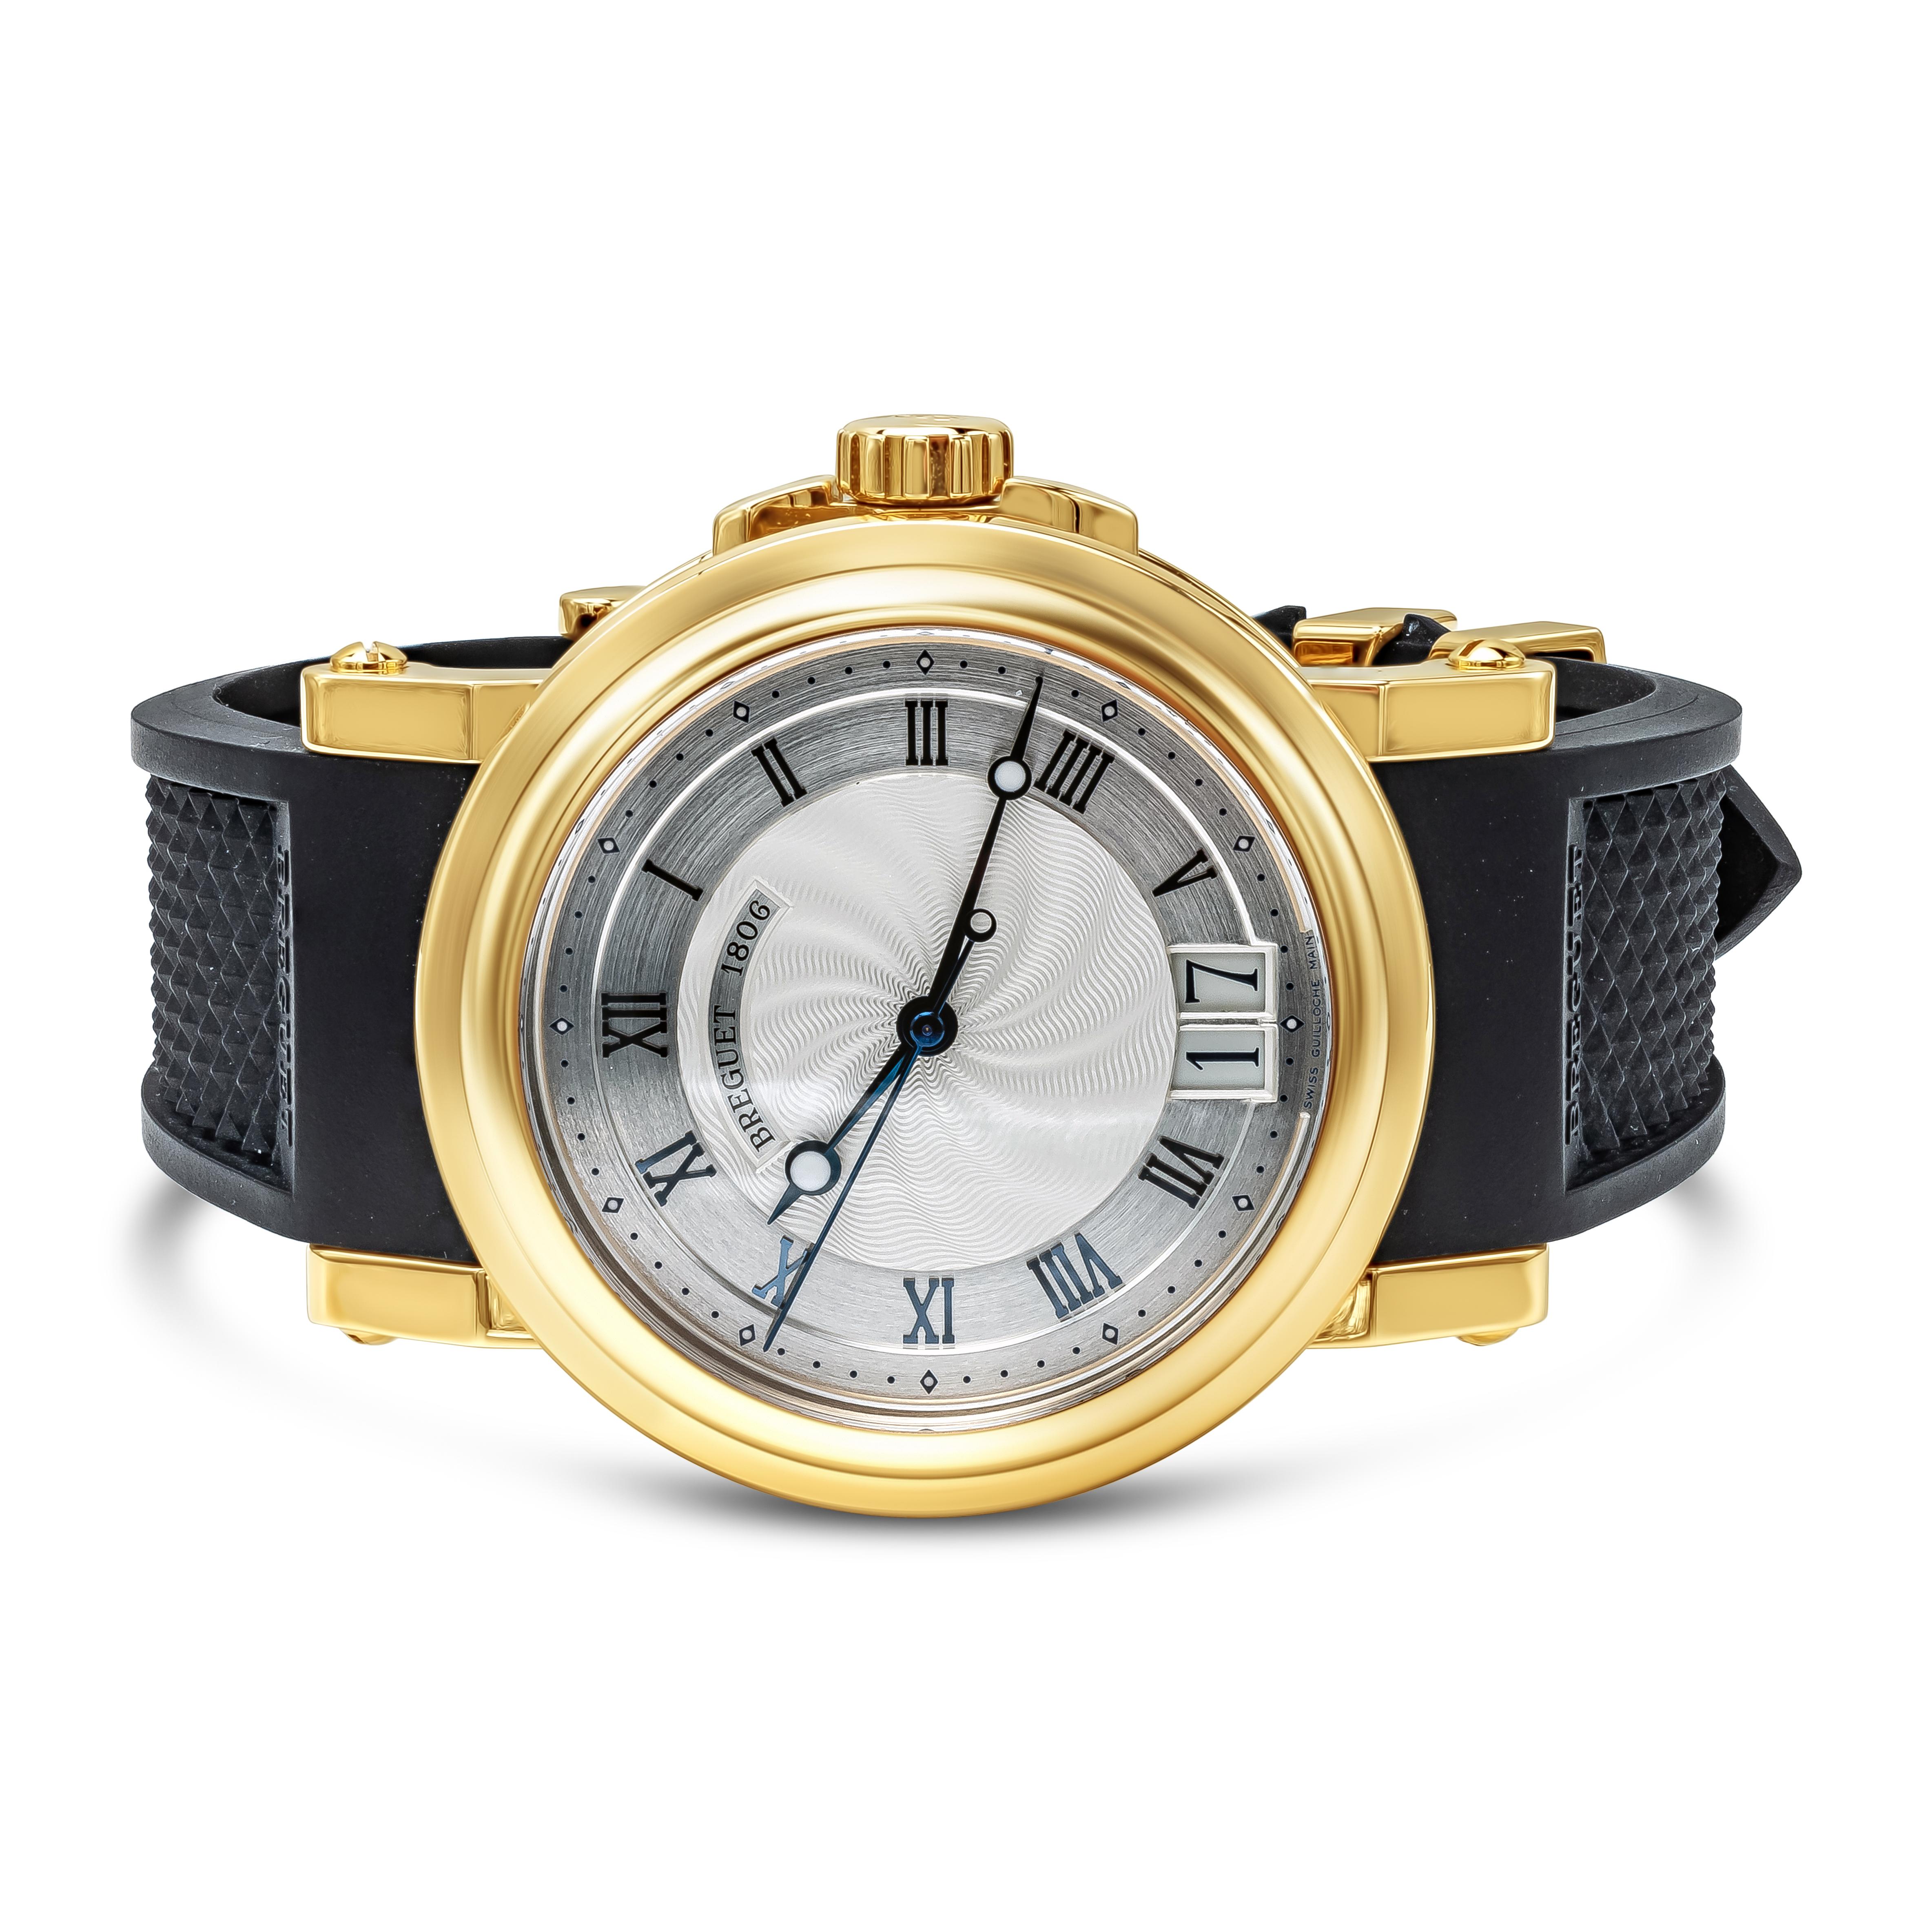 Breguet model 5817BA/12/9V8. Marine Model. Manufactured in 2012.
39mm 18k yellow gold case with sapphire crystal and caseback.
Silver guilloche dial with roman numeral hour markers and a date complication at the 6 o'clock position.
Automatic